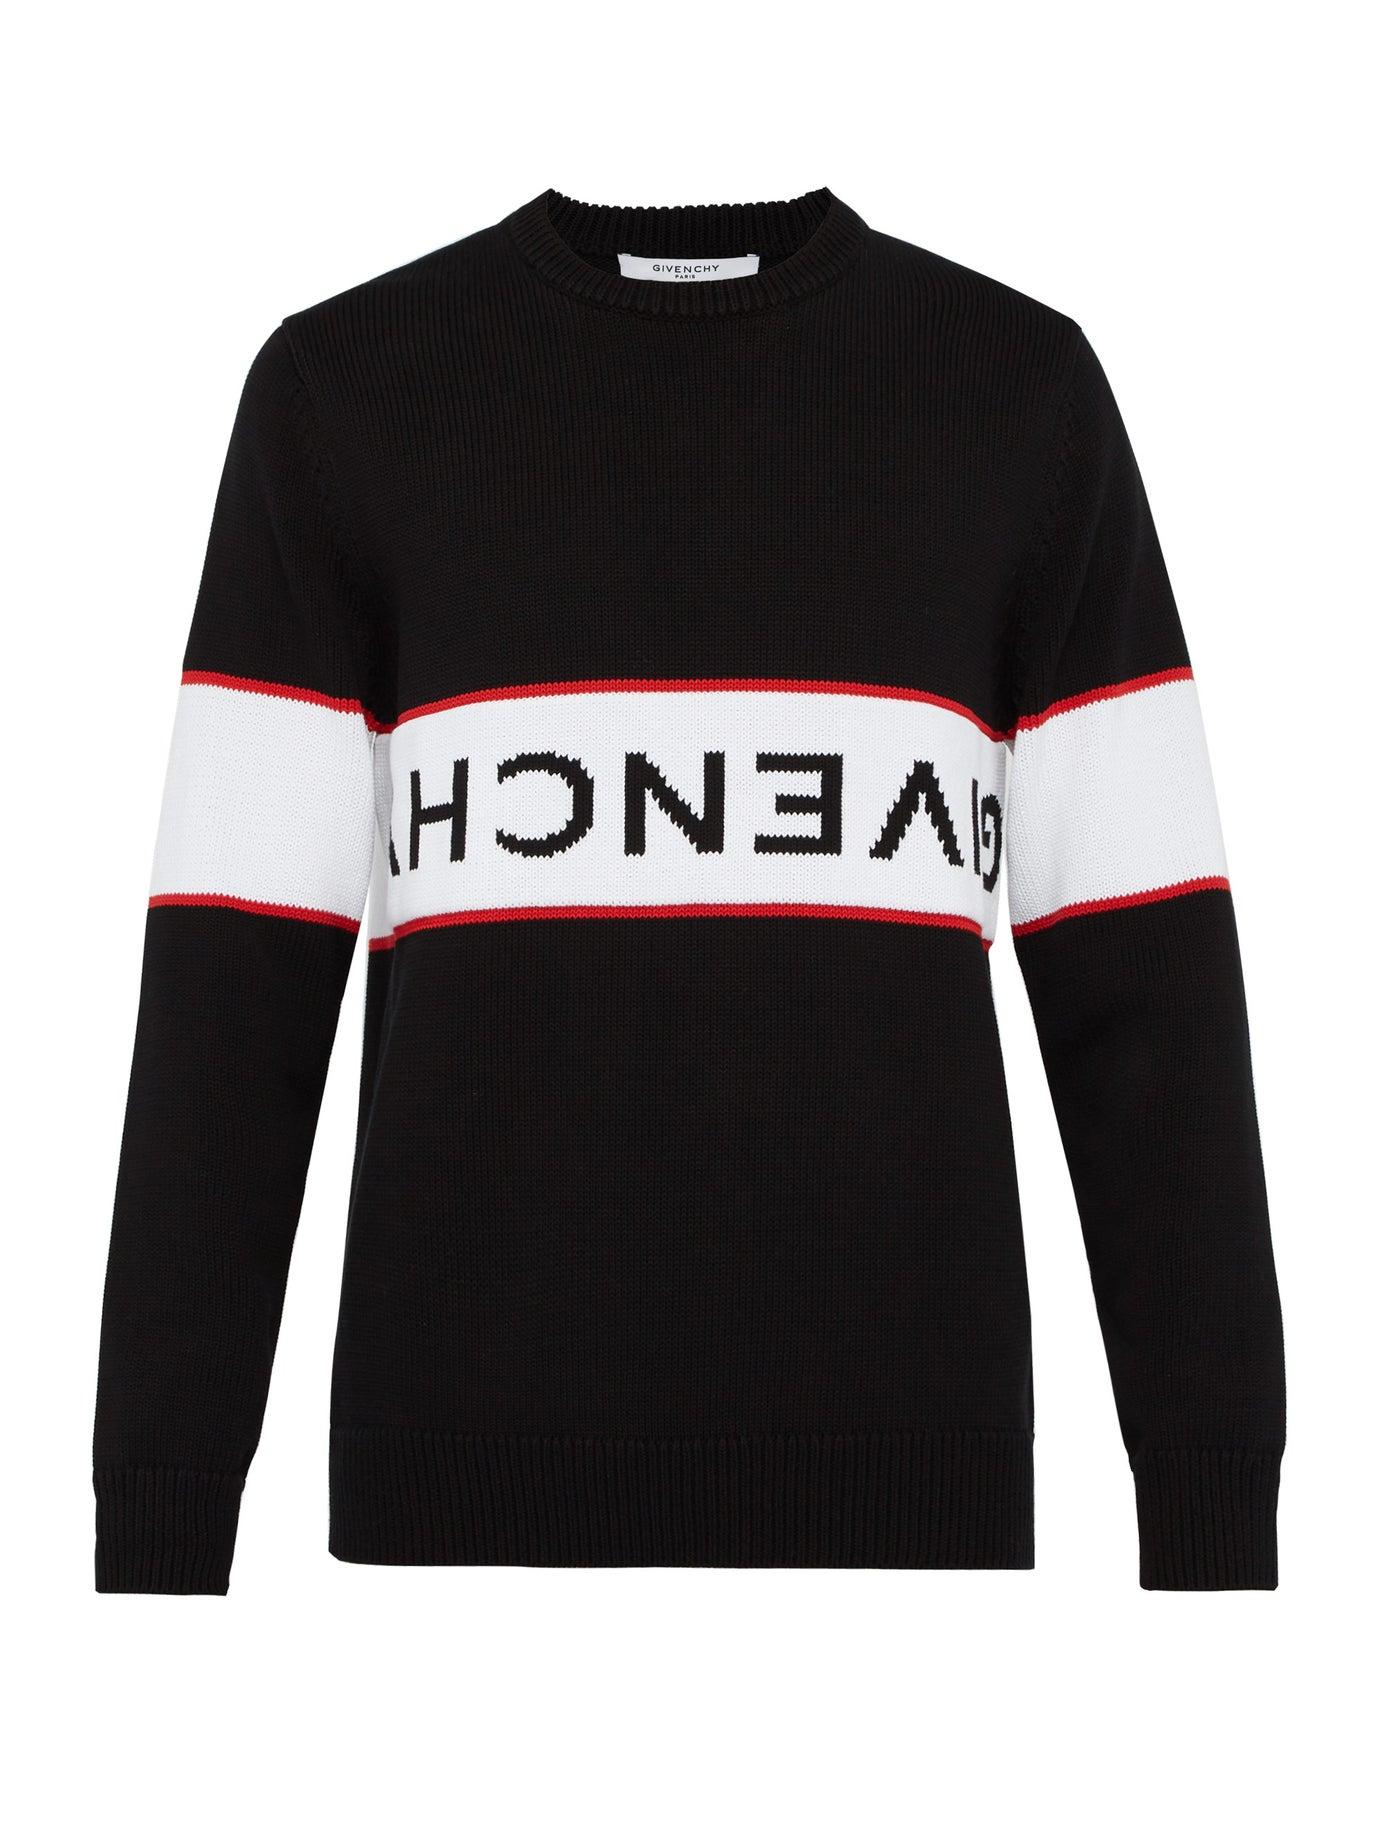 Givenchy Inverted Logo Intarsia Cotton Sweater in Black for Men - Lyst